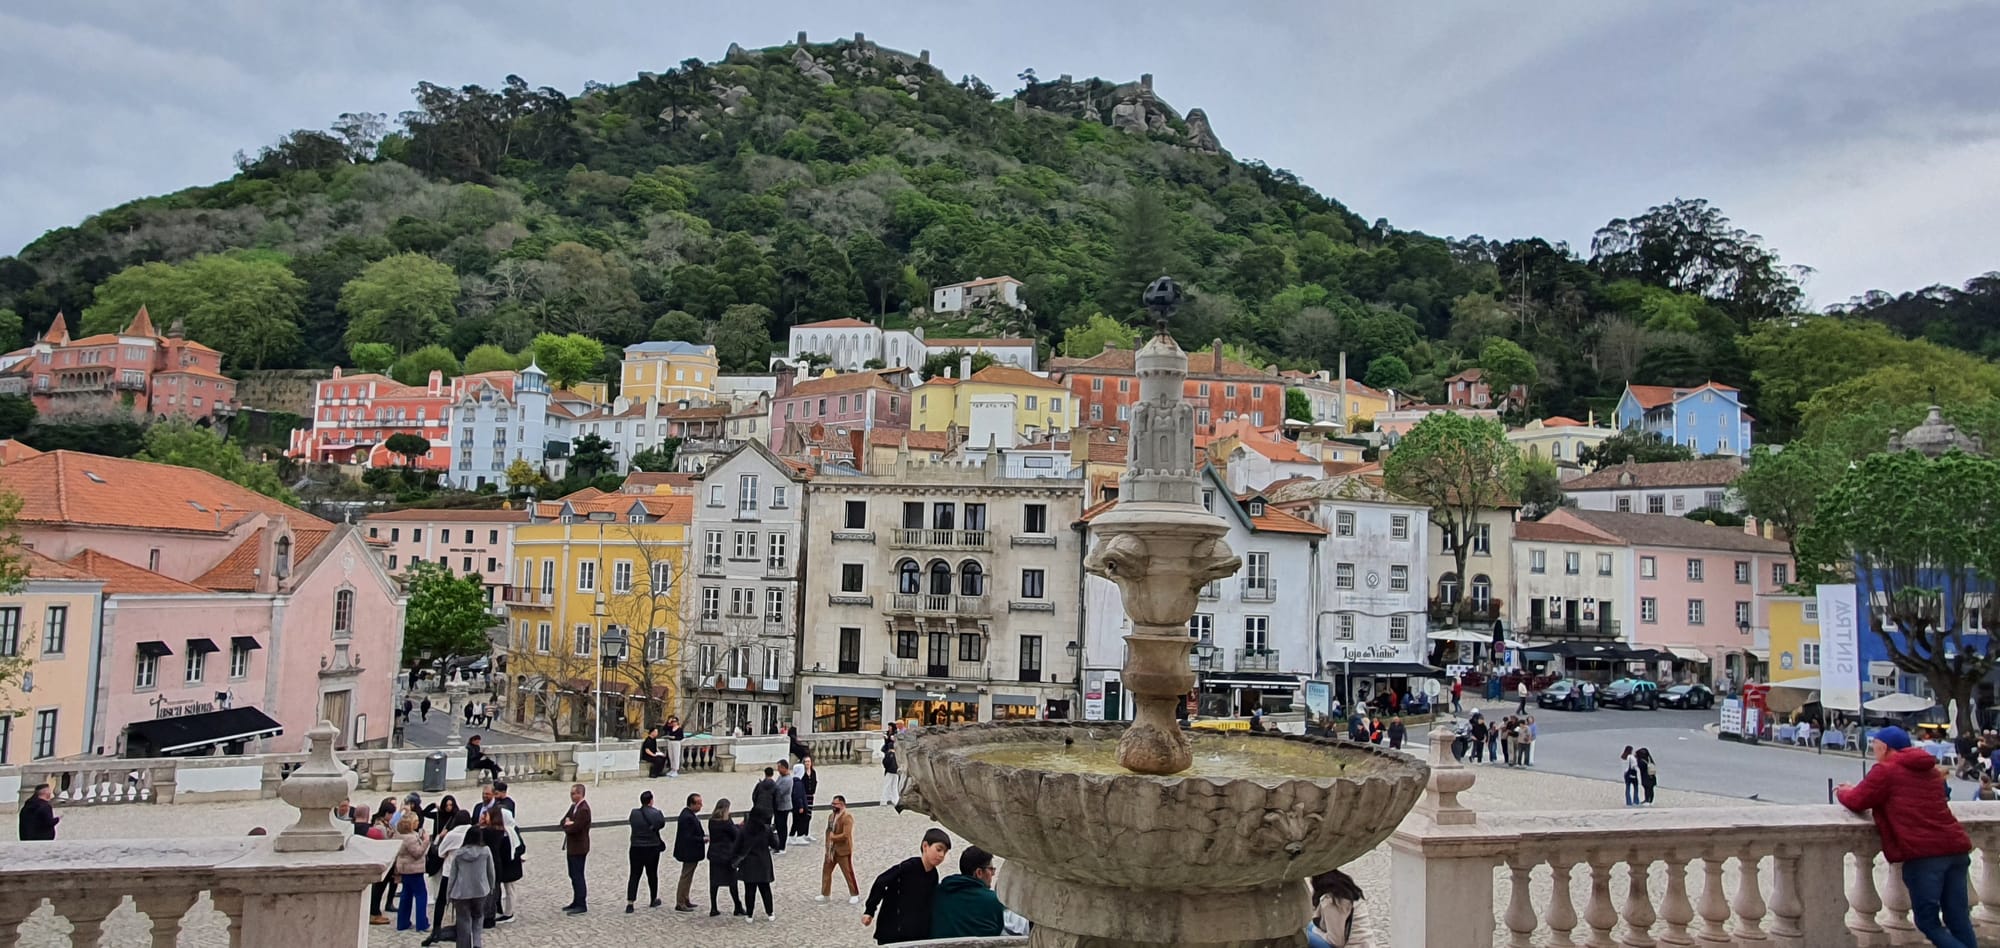 Sintra & Cabo de Roca: The Complete Guide for Your Day Trip from Lisbon